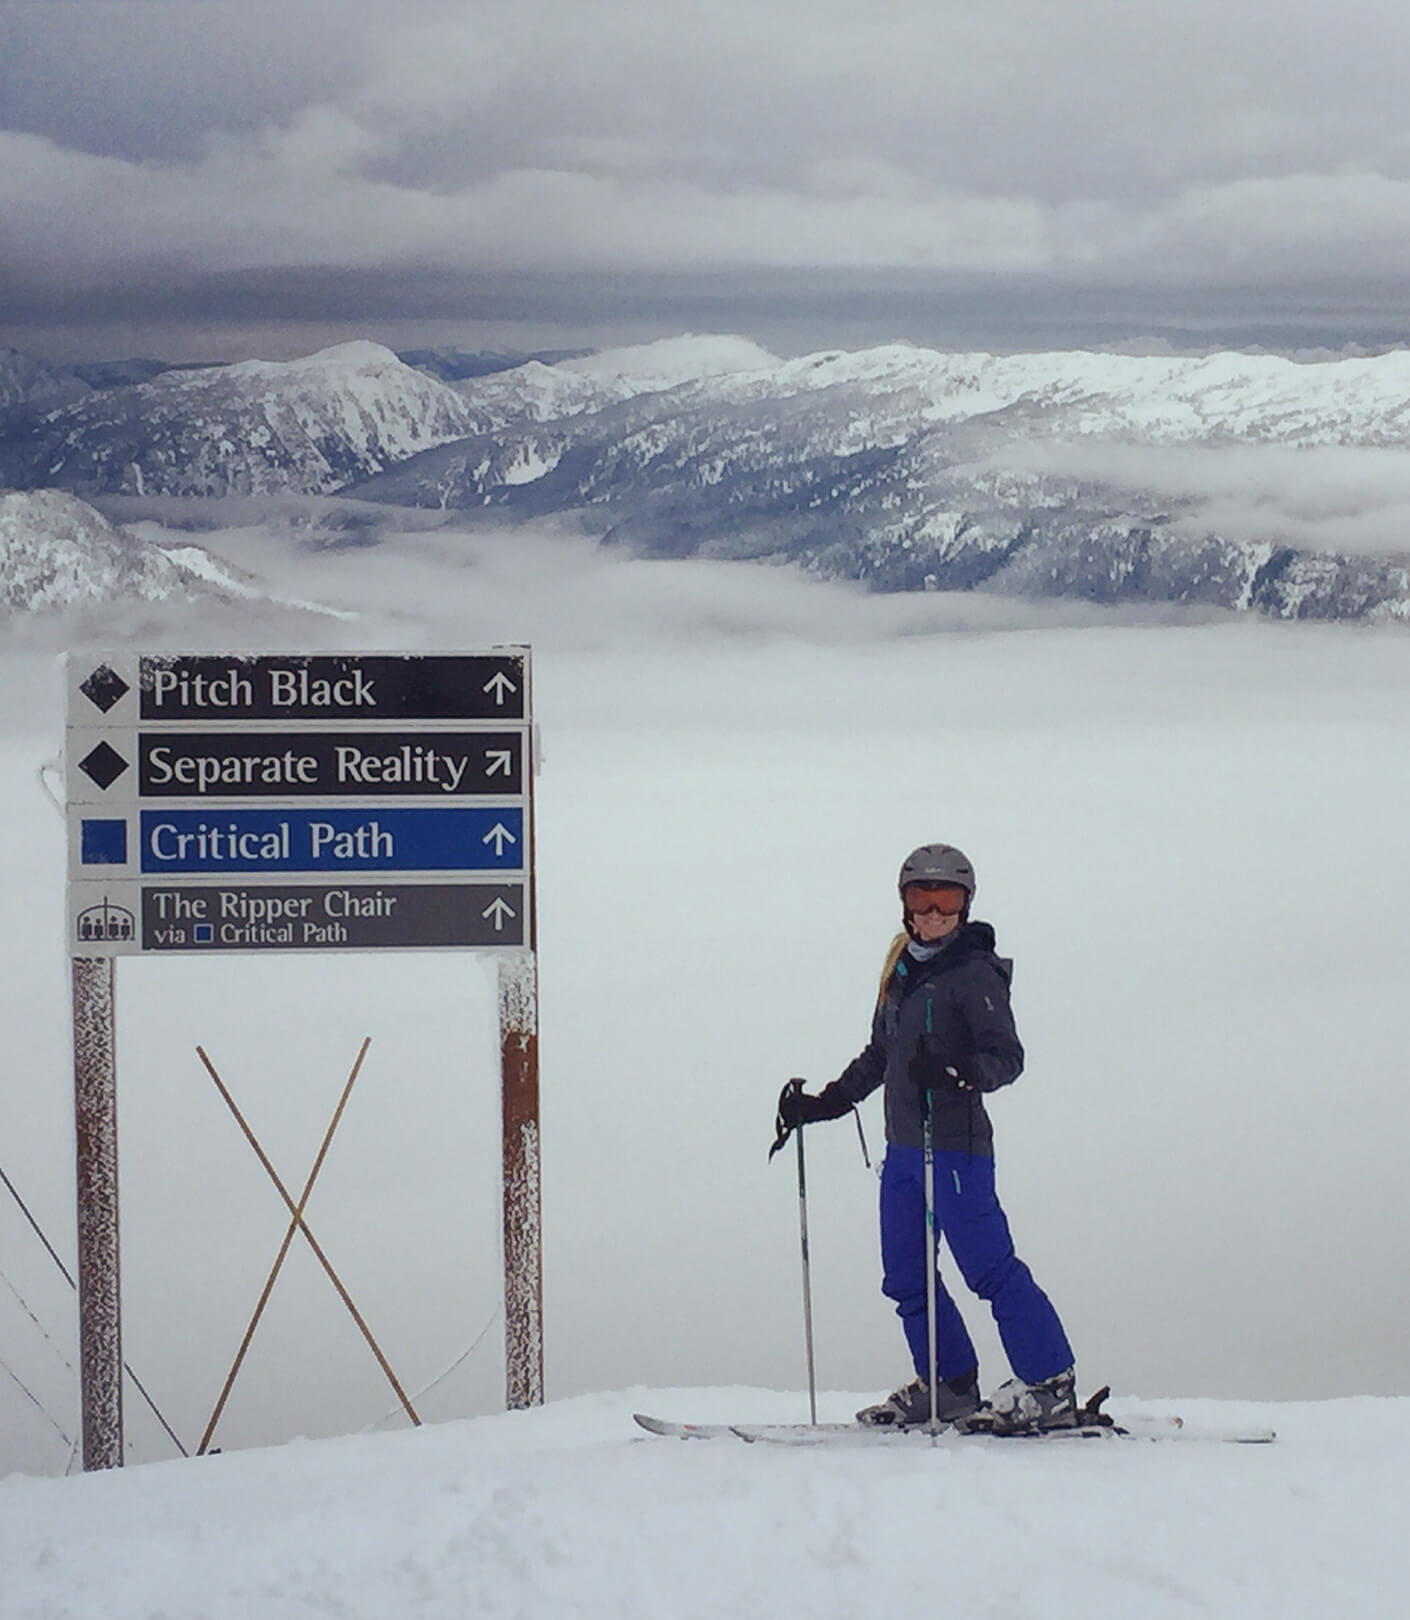 Sarah posing on skis at the top of a snowy mountain